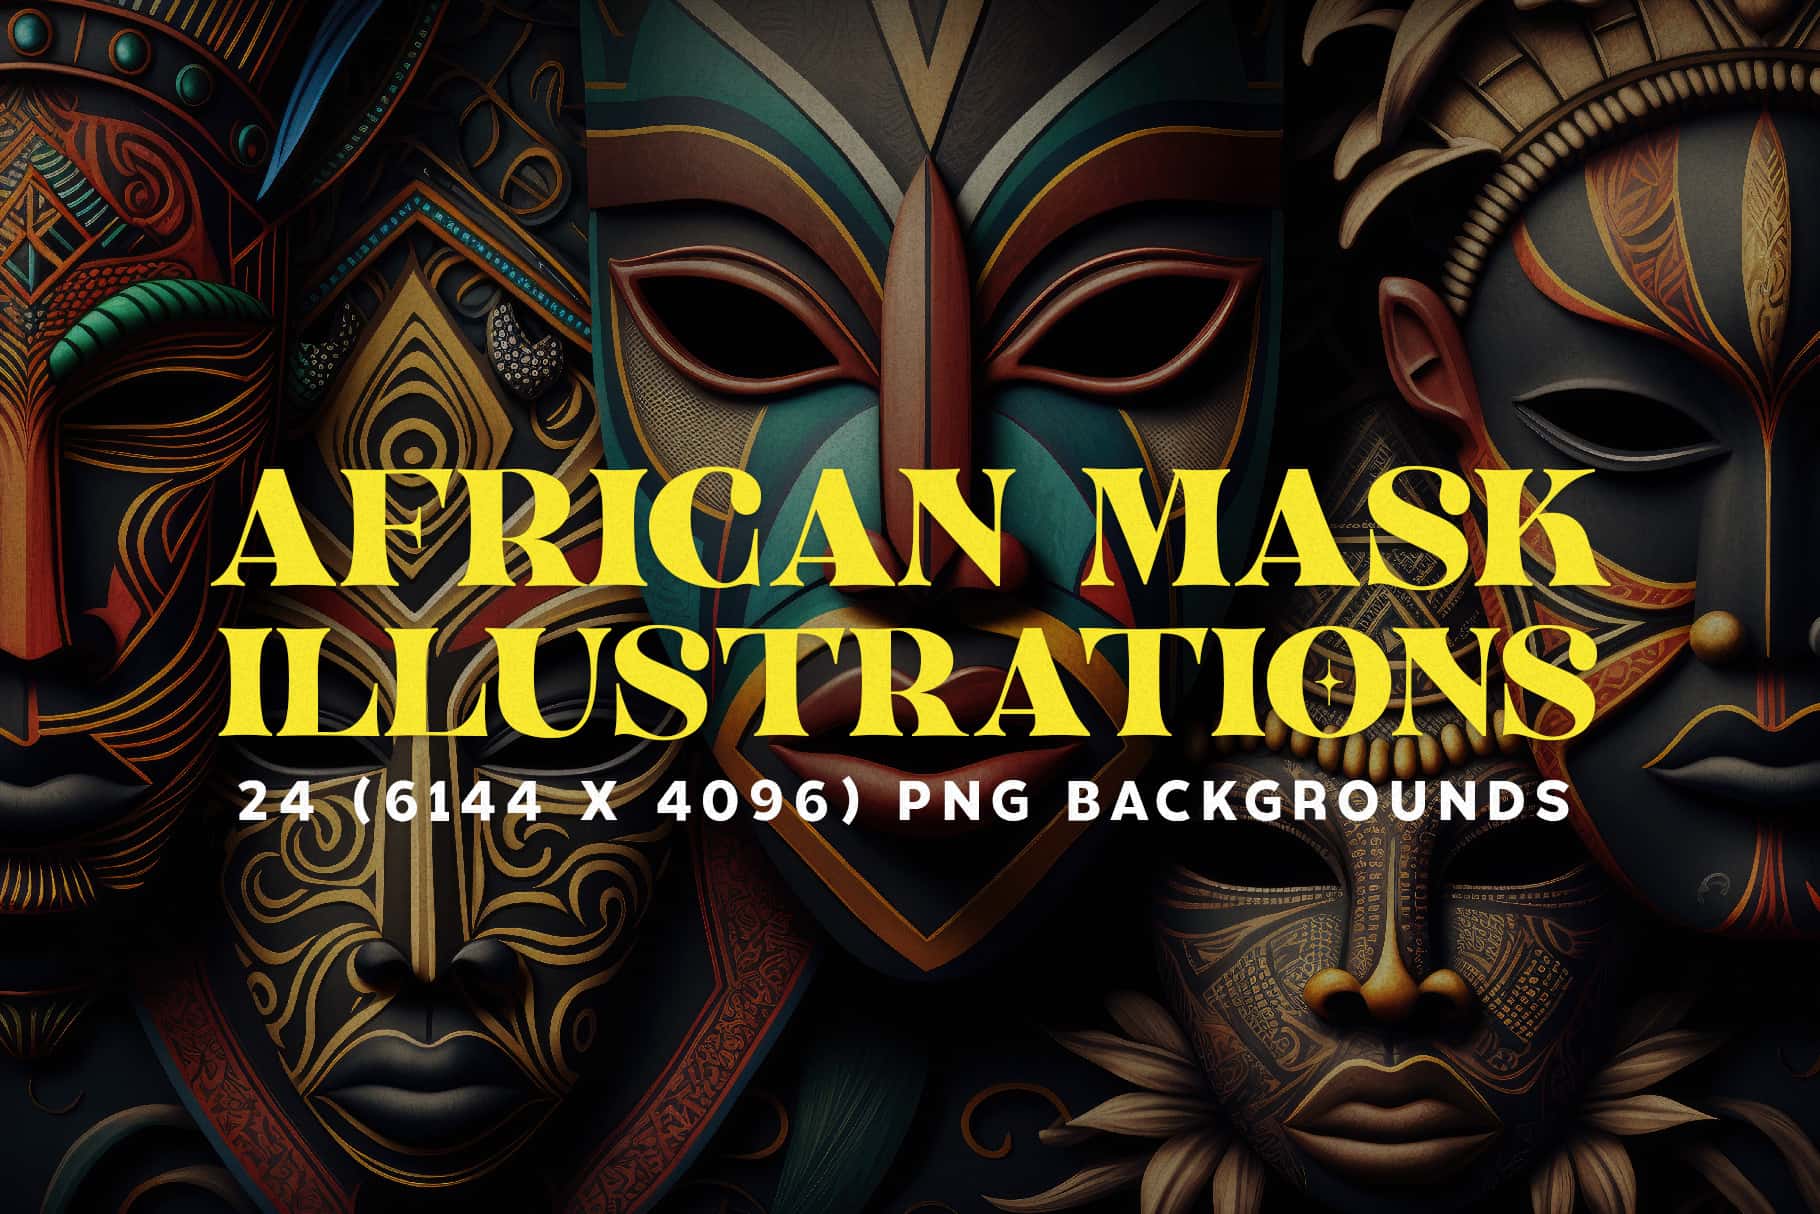 African Mask illustrations Cover